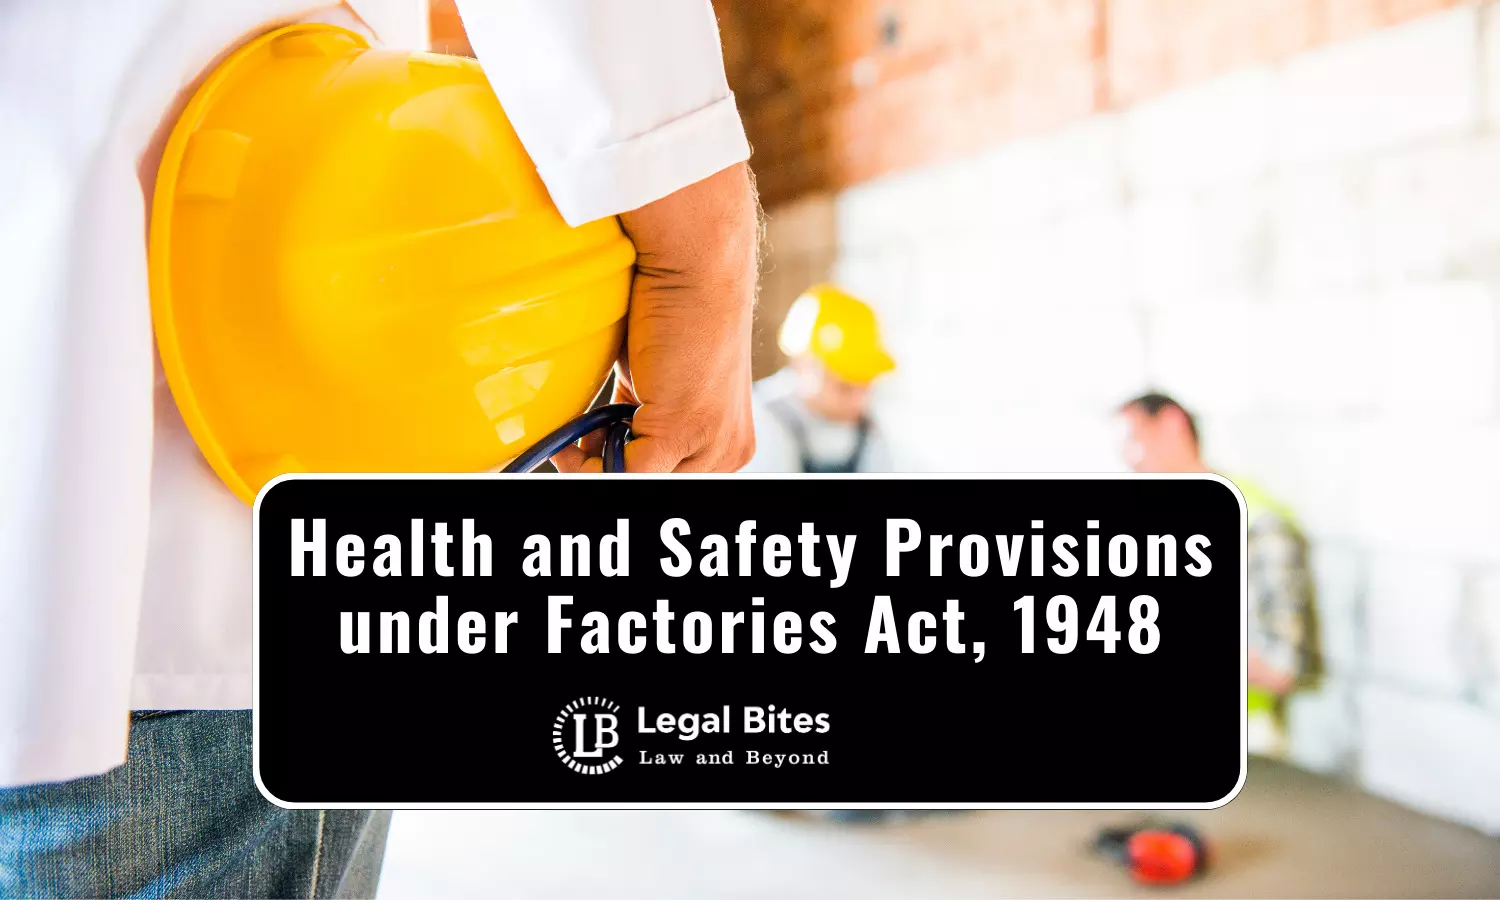 Health and Safety Provisions under Factories Act, 1948